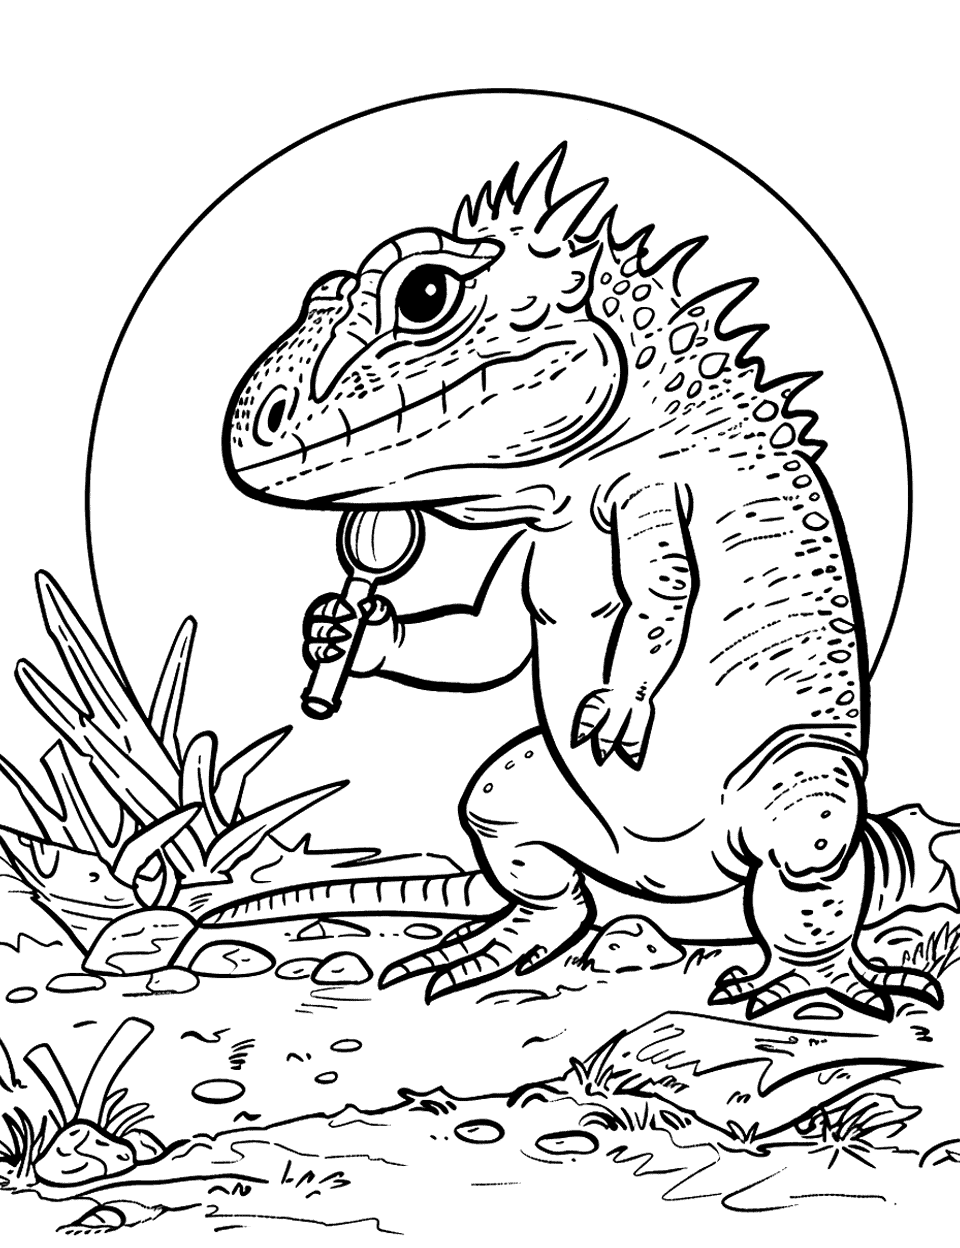 Horned Lizard with a Magnifying Glass Coloring Page - A horned lizard acting like a detective, holding a magnifying glass.